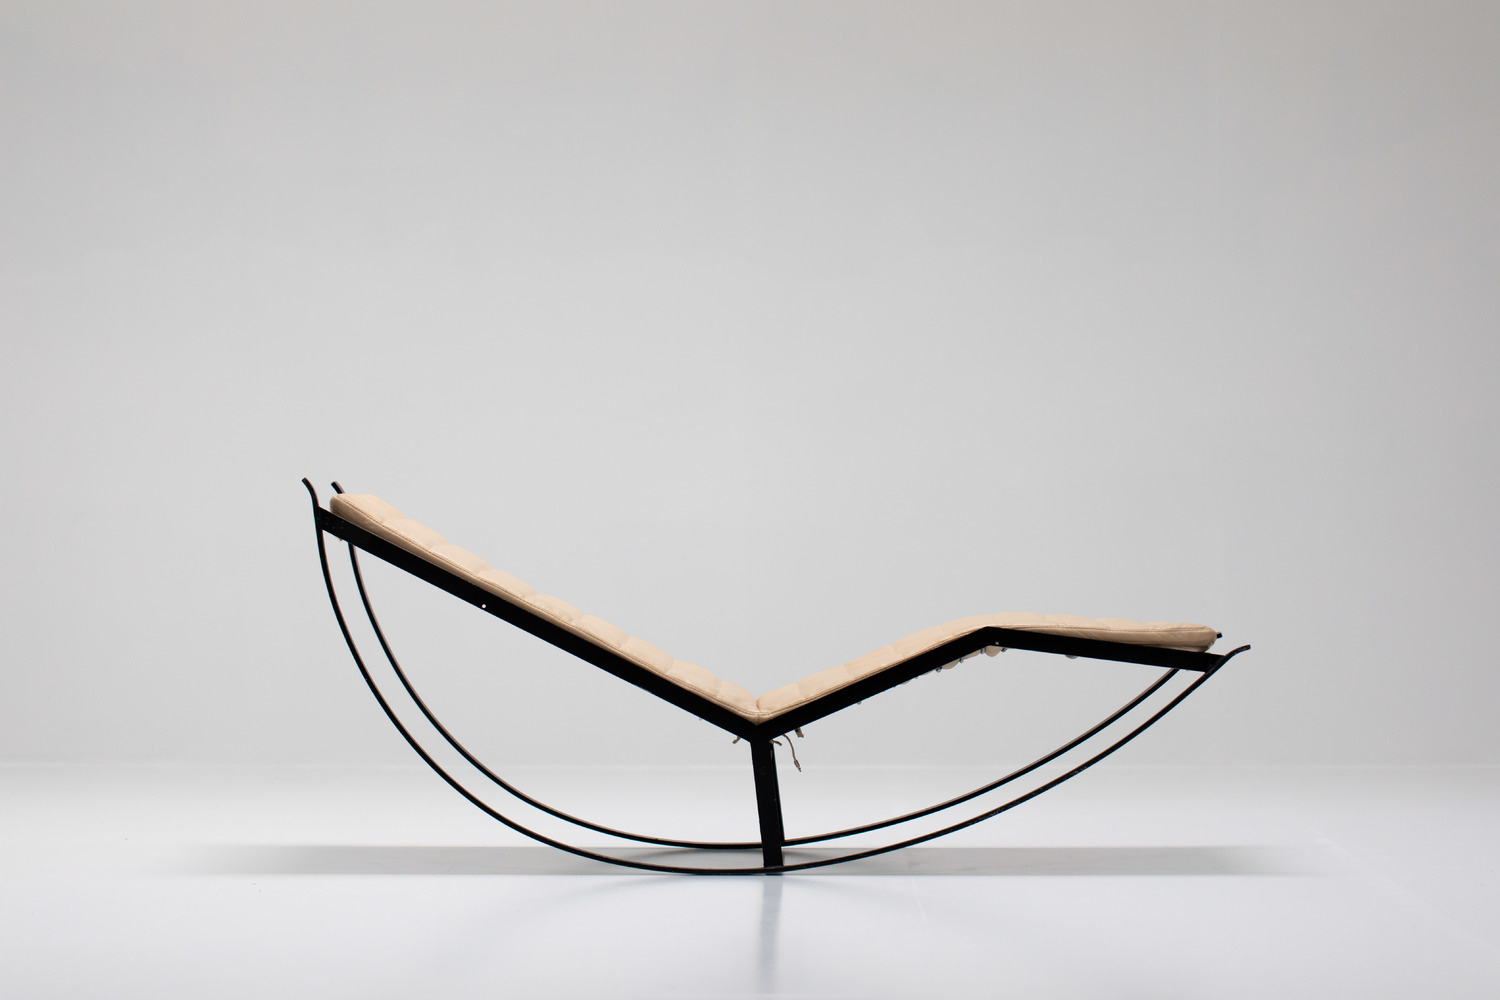 Italian Chaise Longue by Willy Rizzo